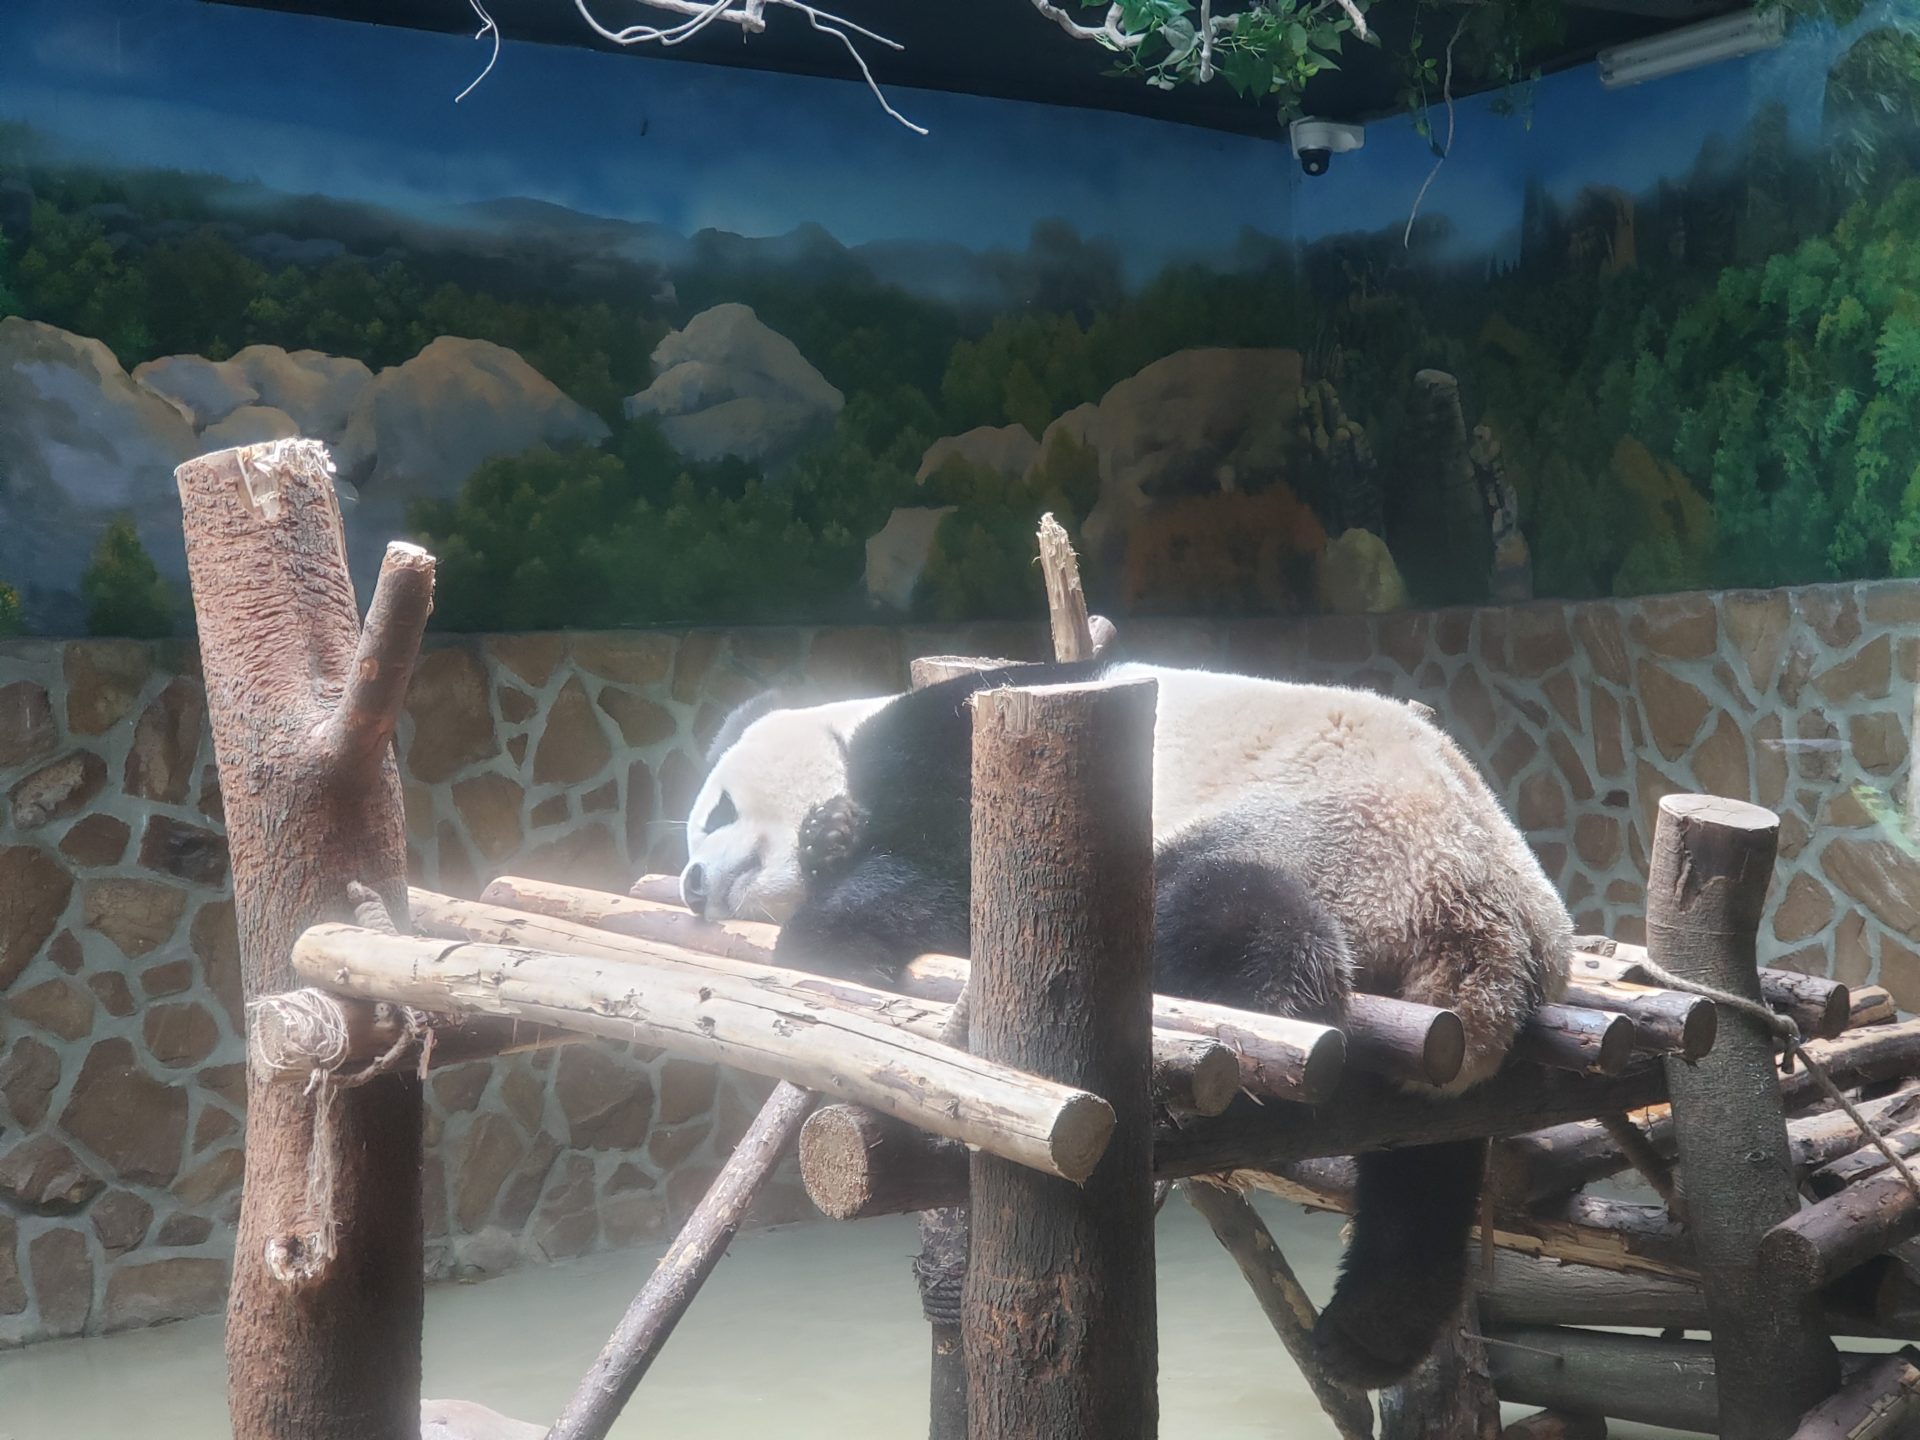 a panda sleeping on a wooden structure